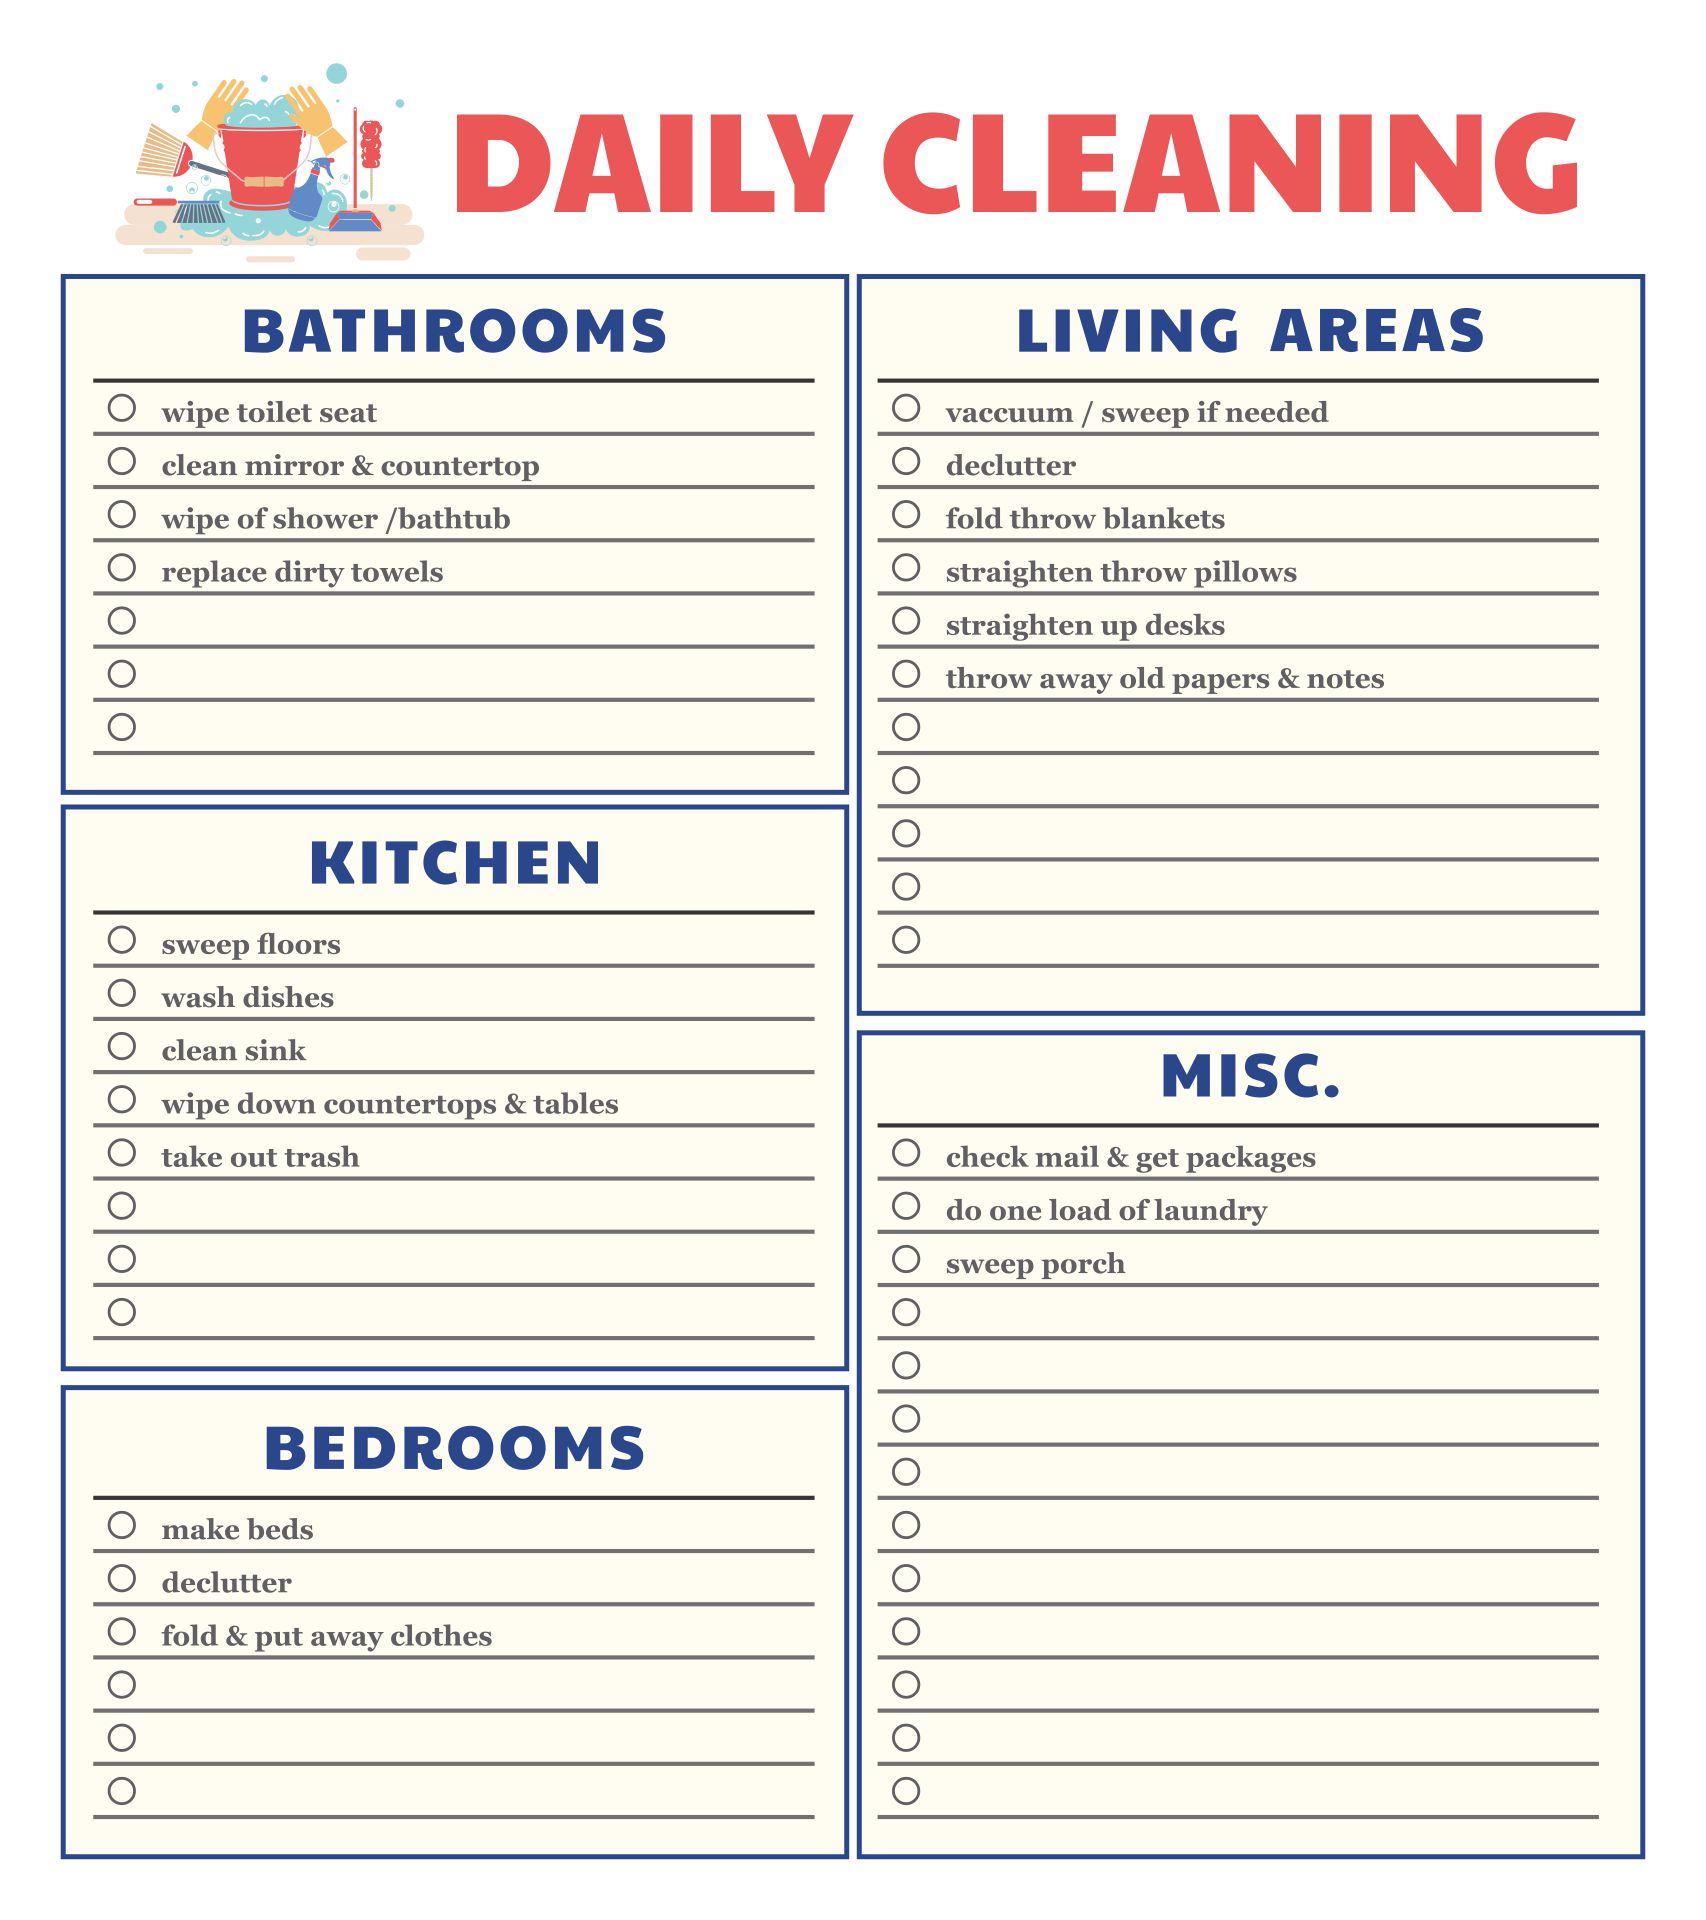 monthly-chore-chart-cleaning-schedule-templates-schedule-template